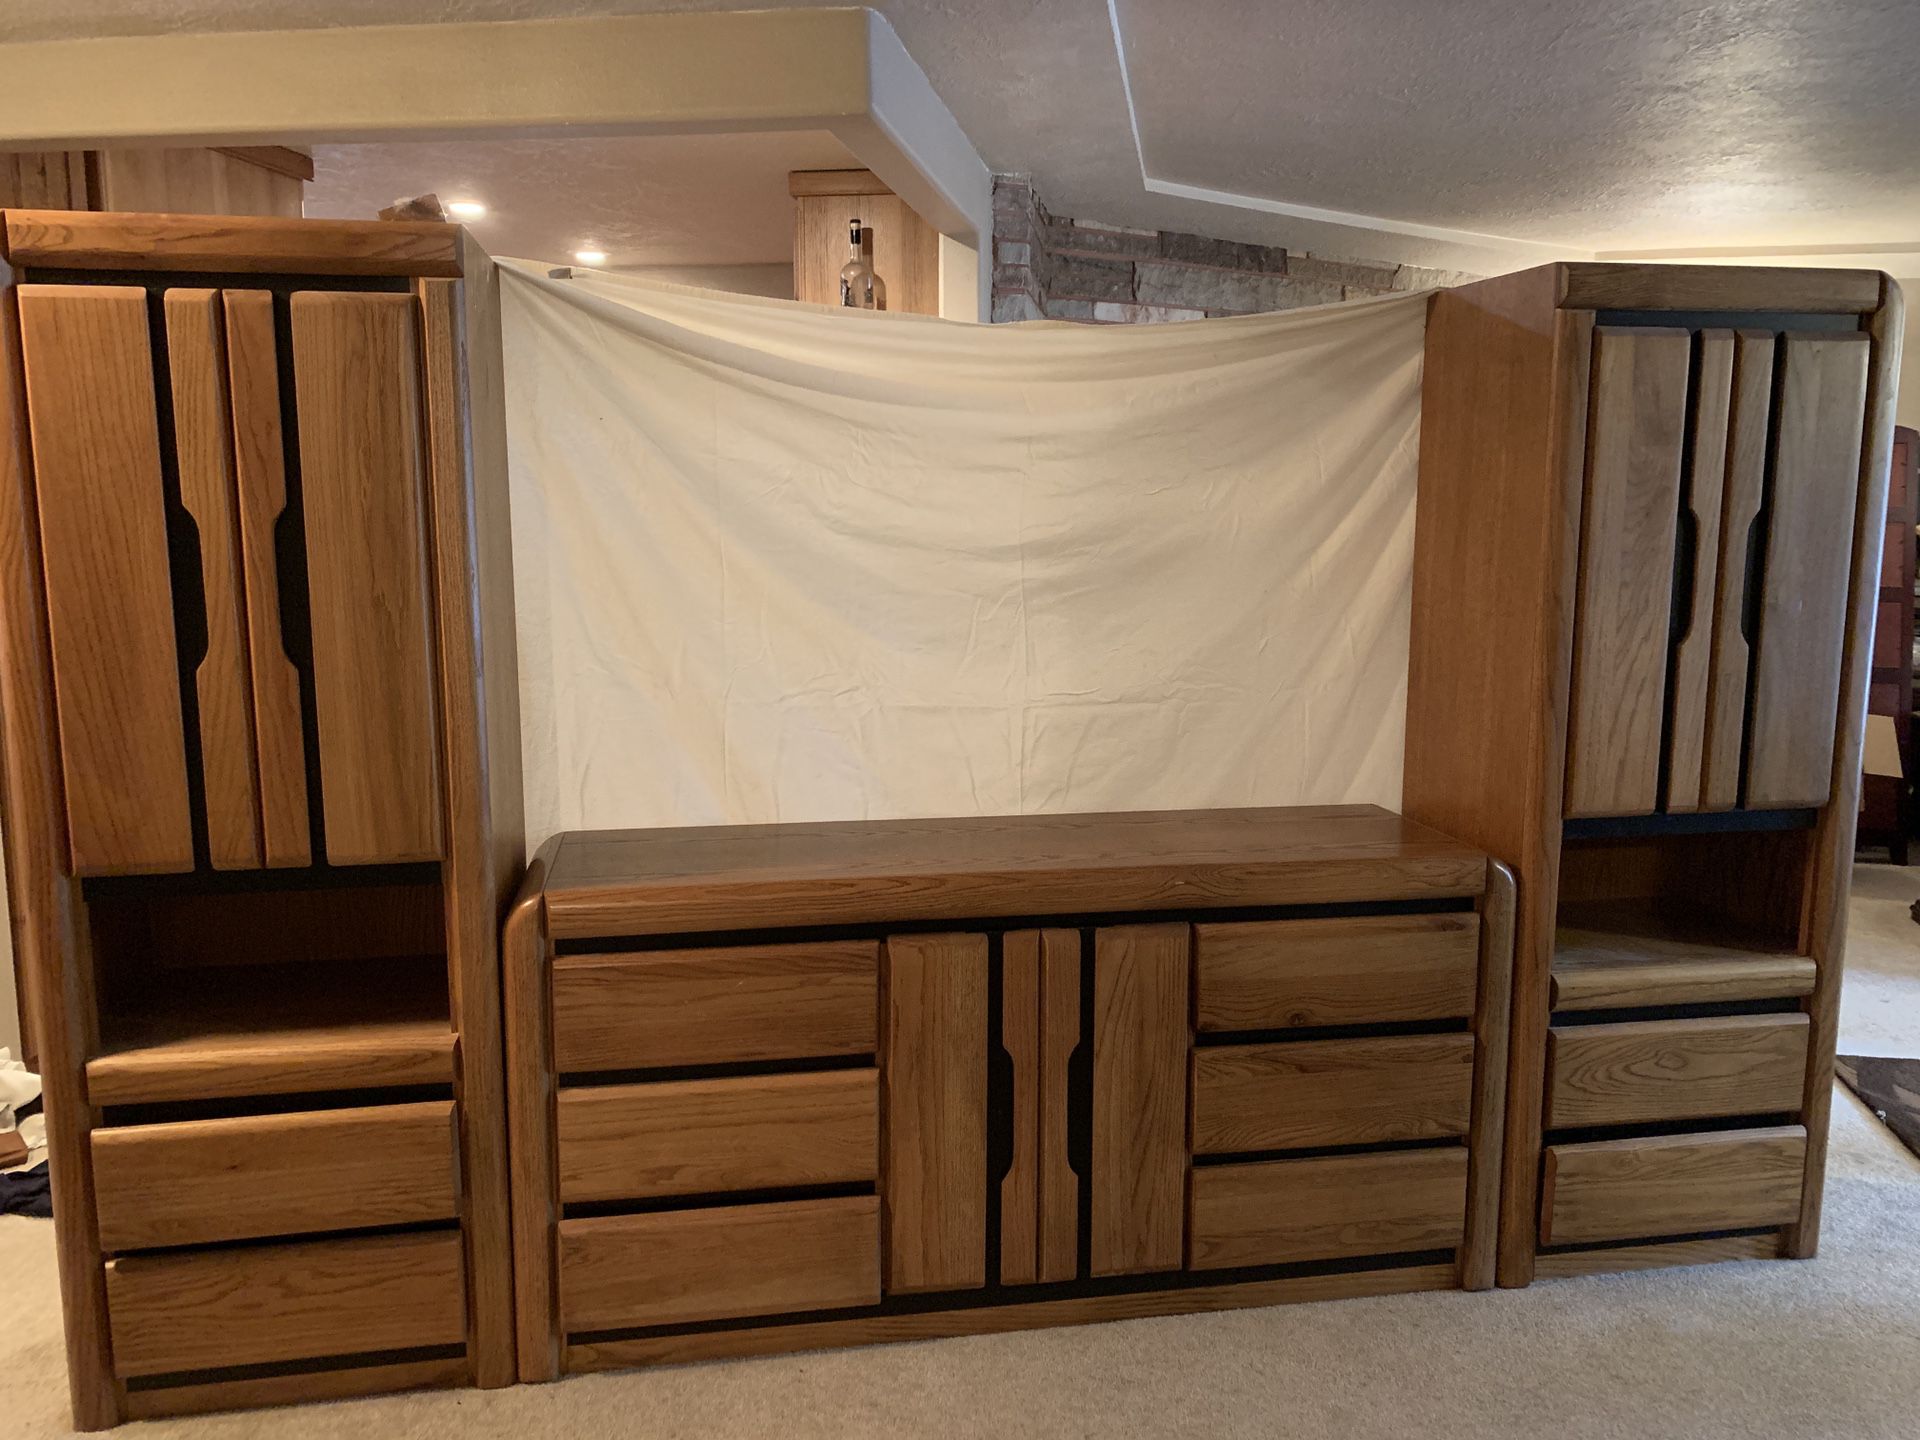 3-piece solid oak dresser and side cabinets.